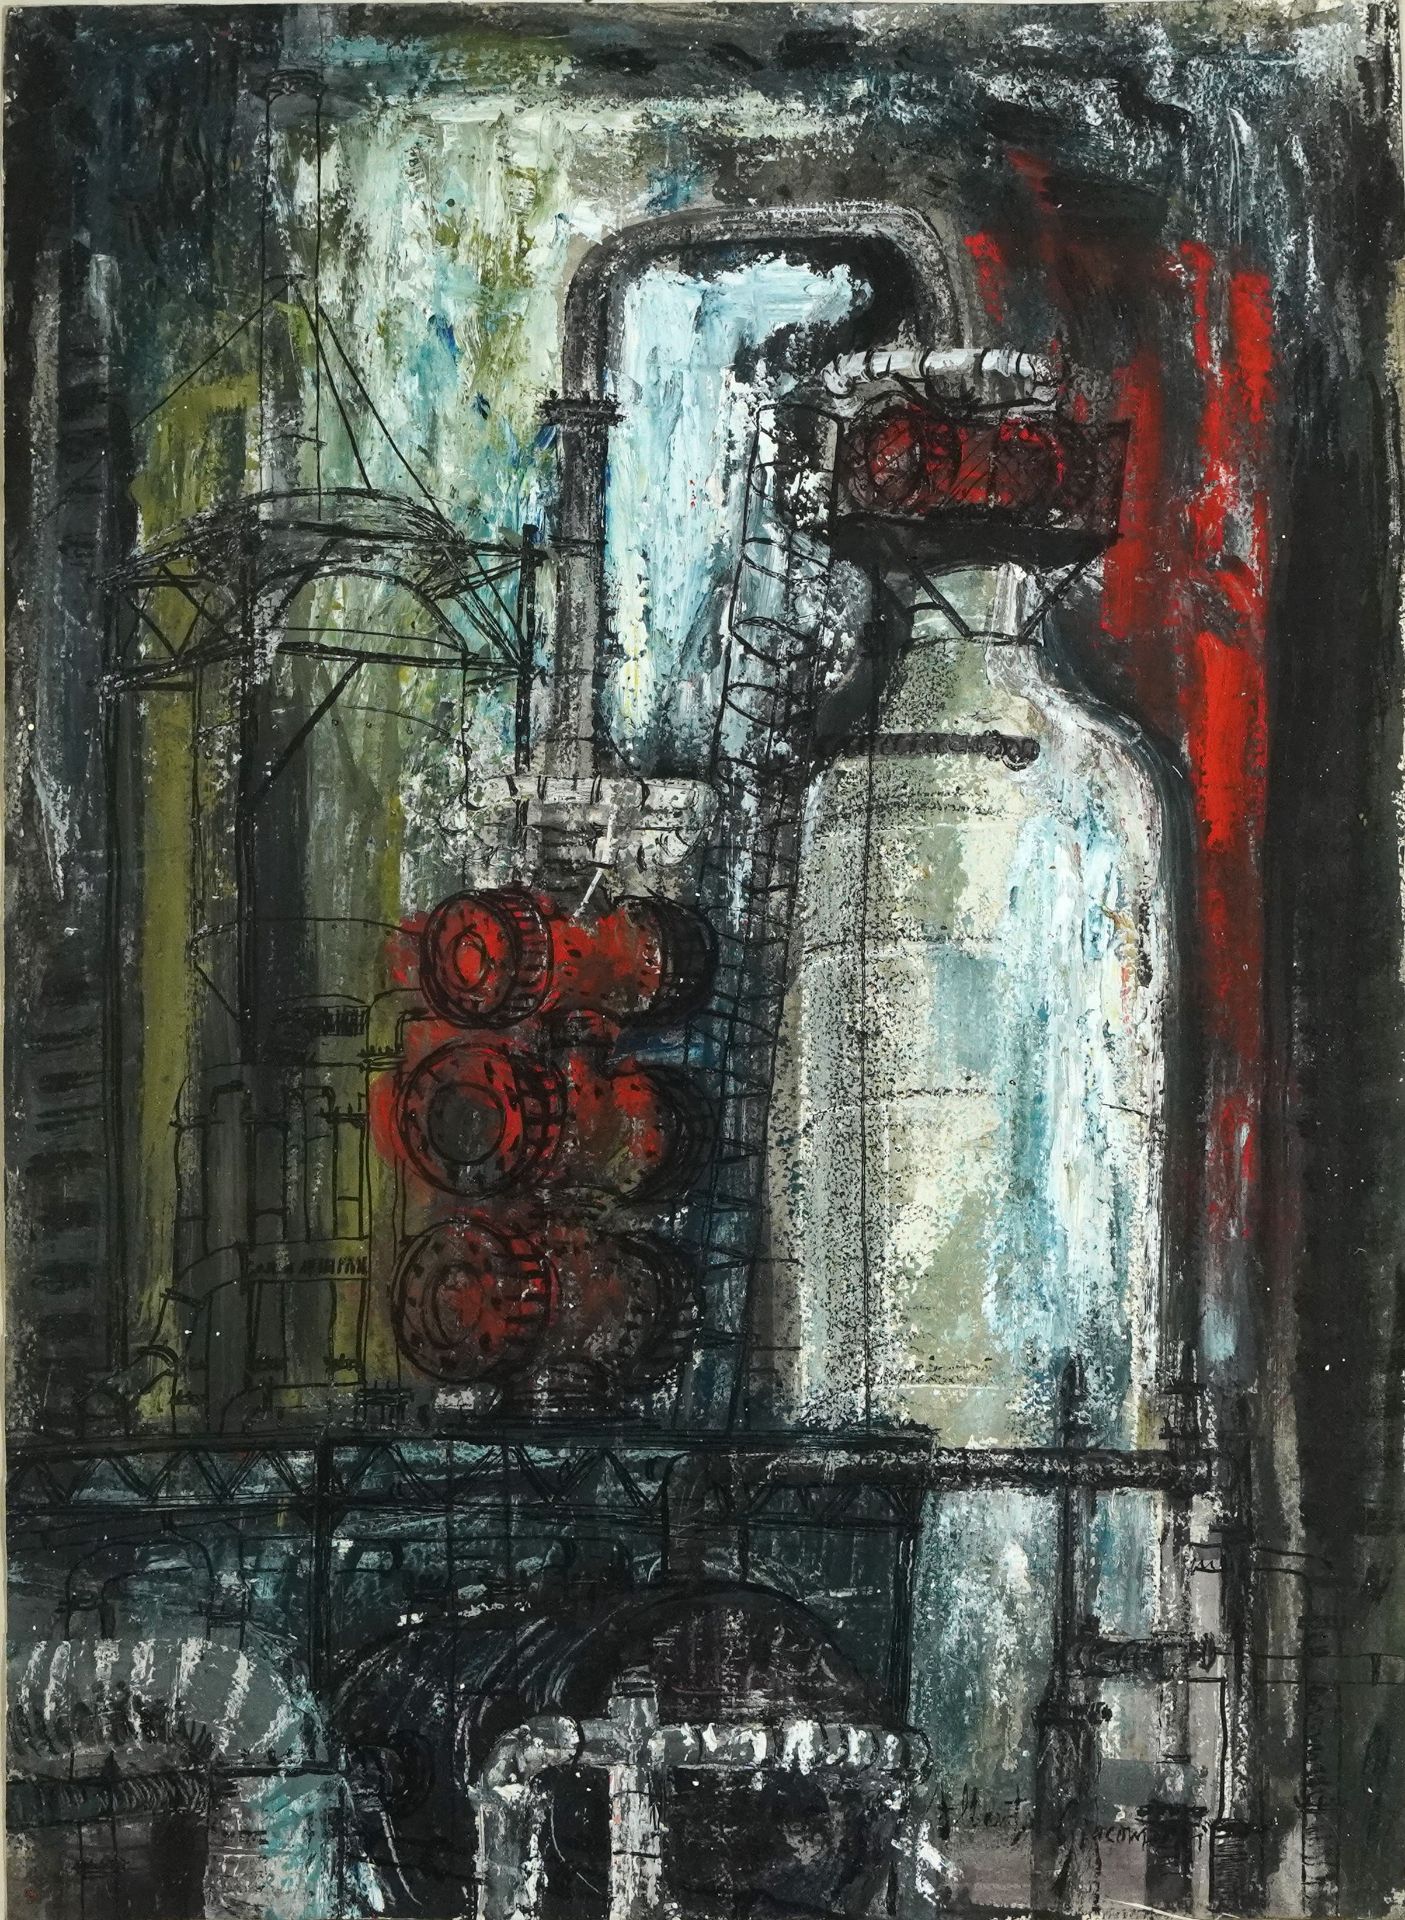 Abstract composition, industrial scene, gouache, mounted, framed and glazed, 66cm x 49cm excluding